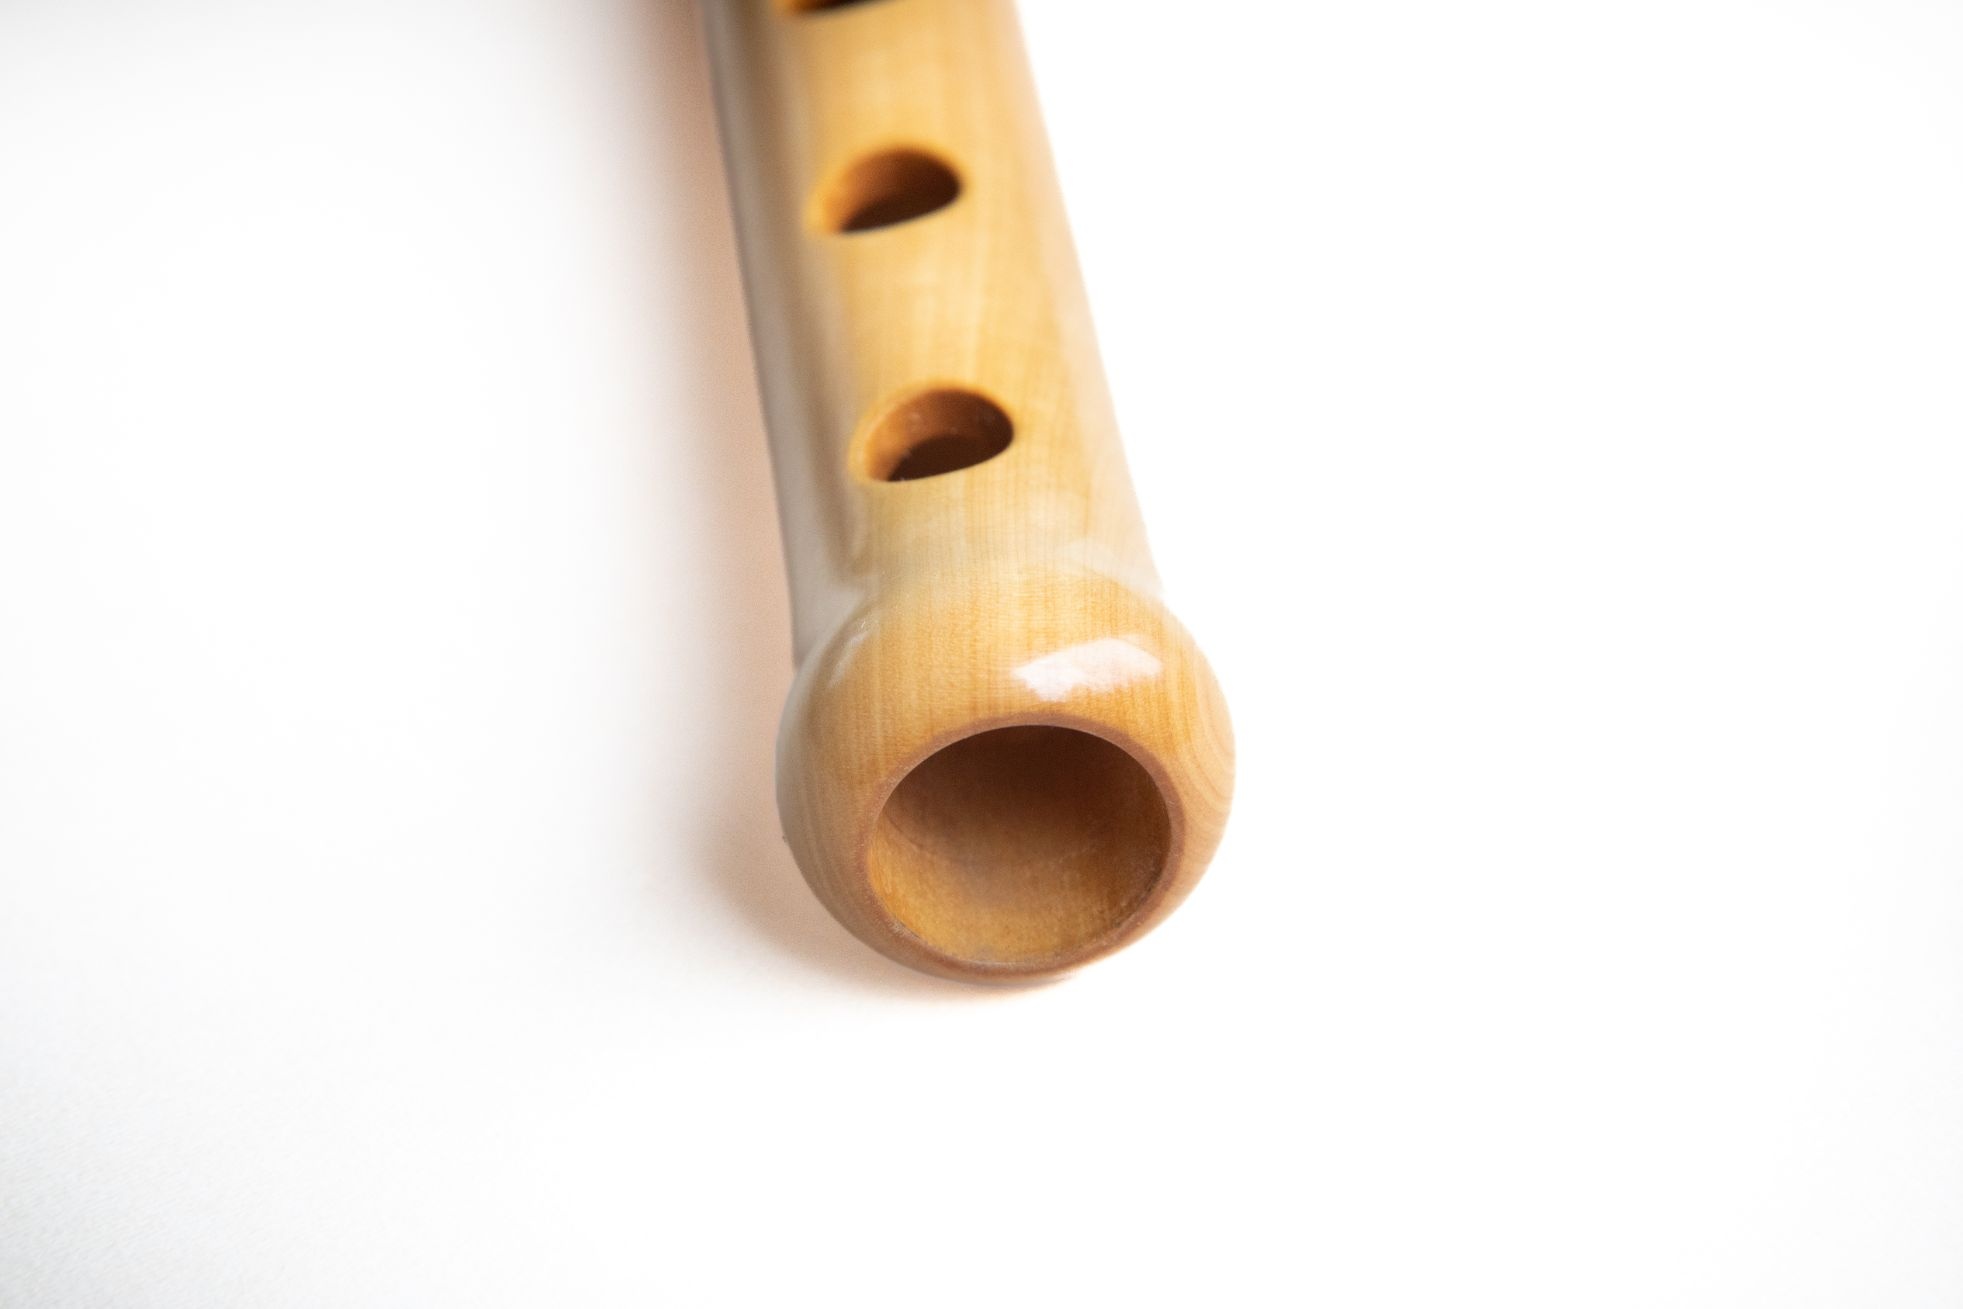 Duduk: An Armenian wind instrument, A particular type of oboe due to its cylindrical bore. 1970x1310 HD Wallpaper.